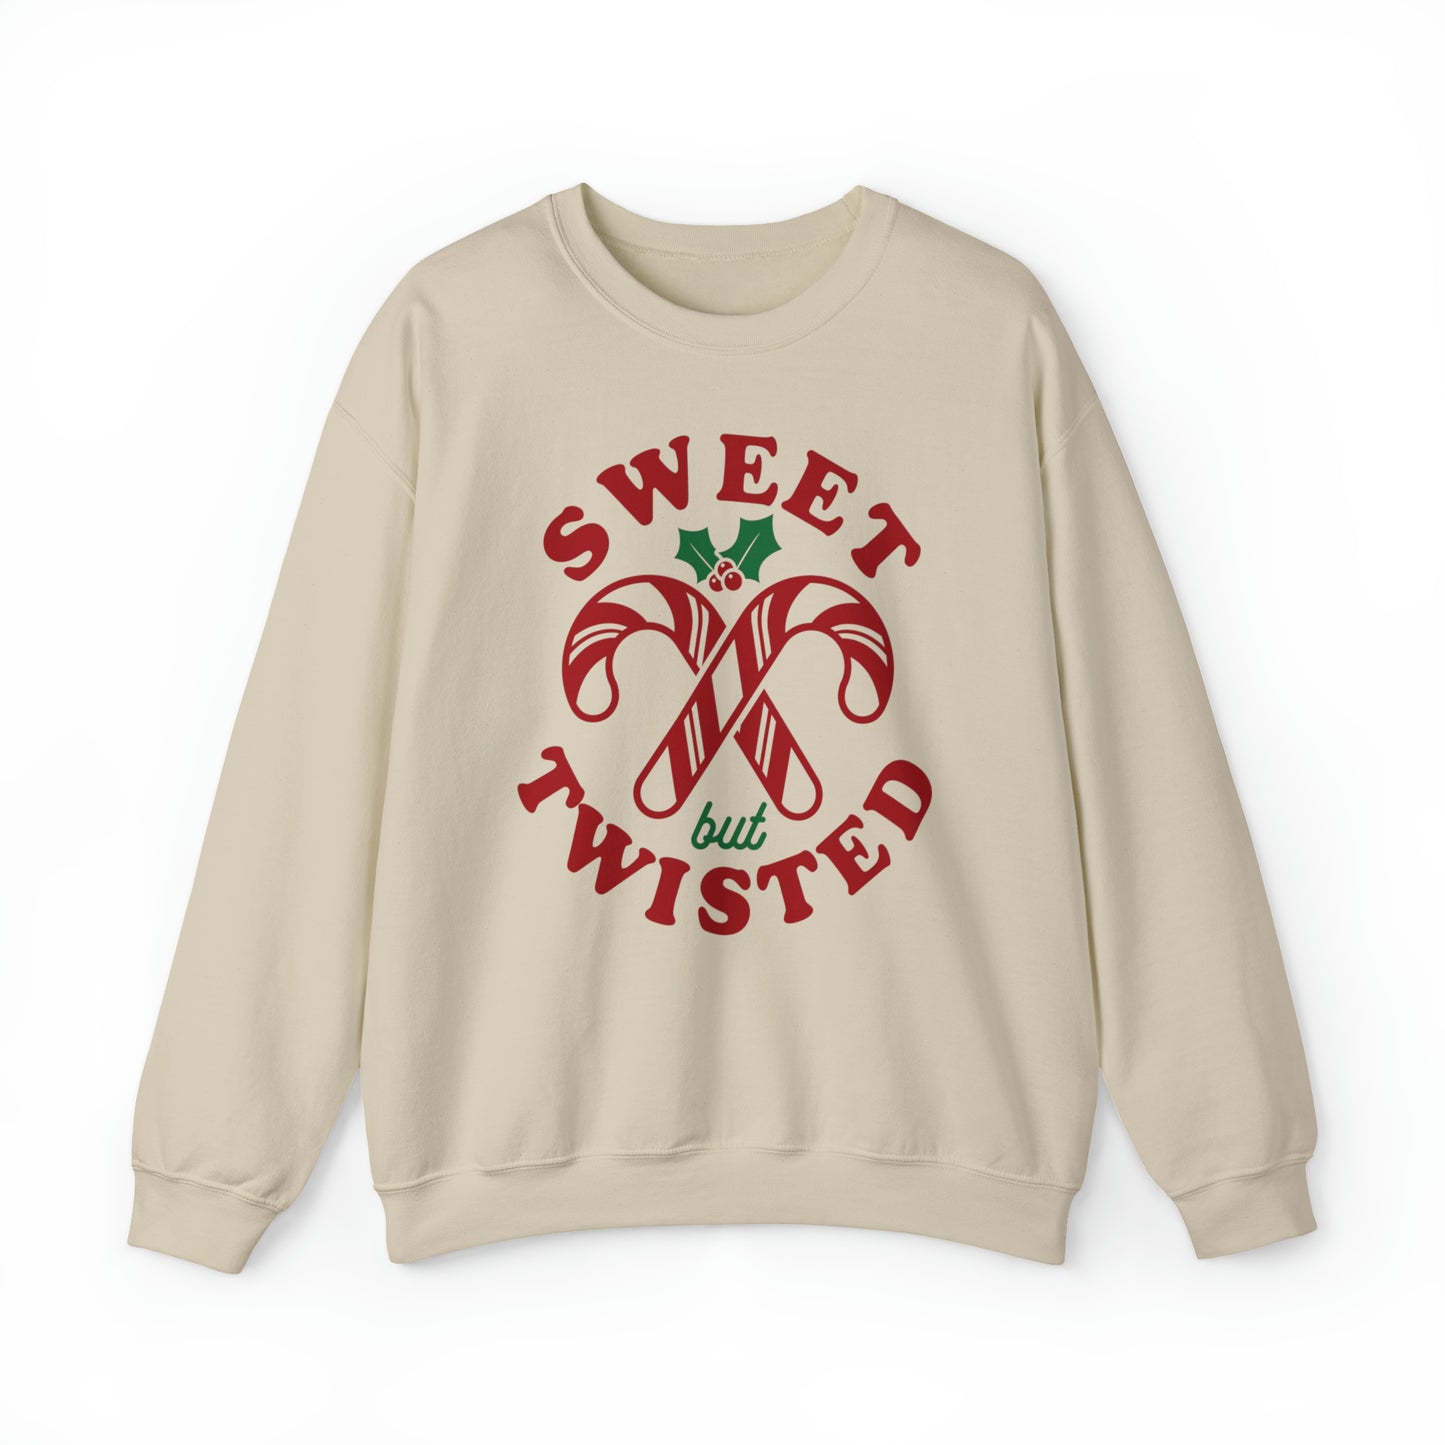 Sweet but Twisted Christmas Crewneck Sweater